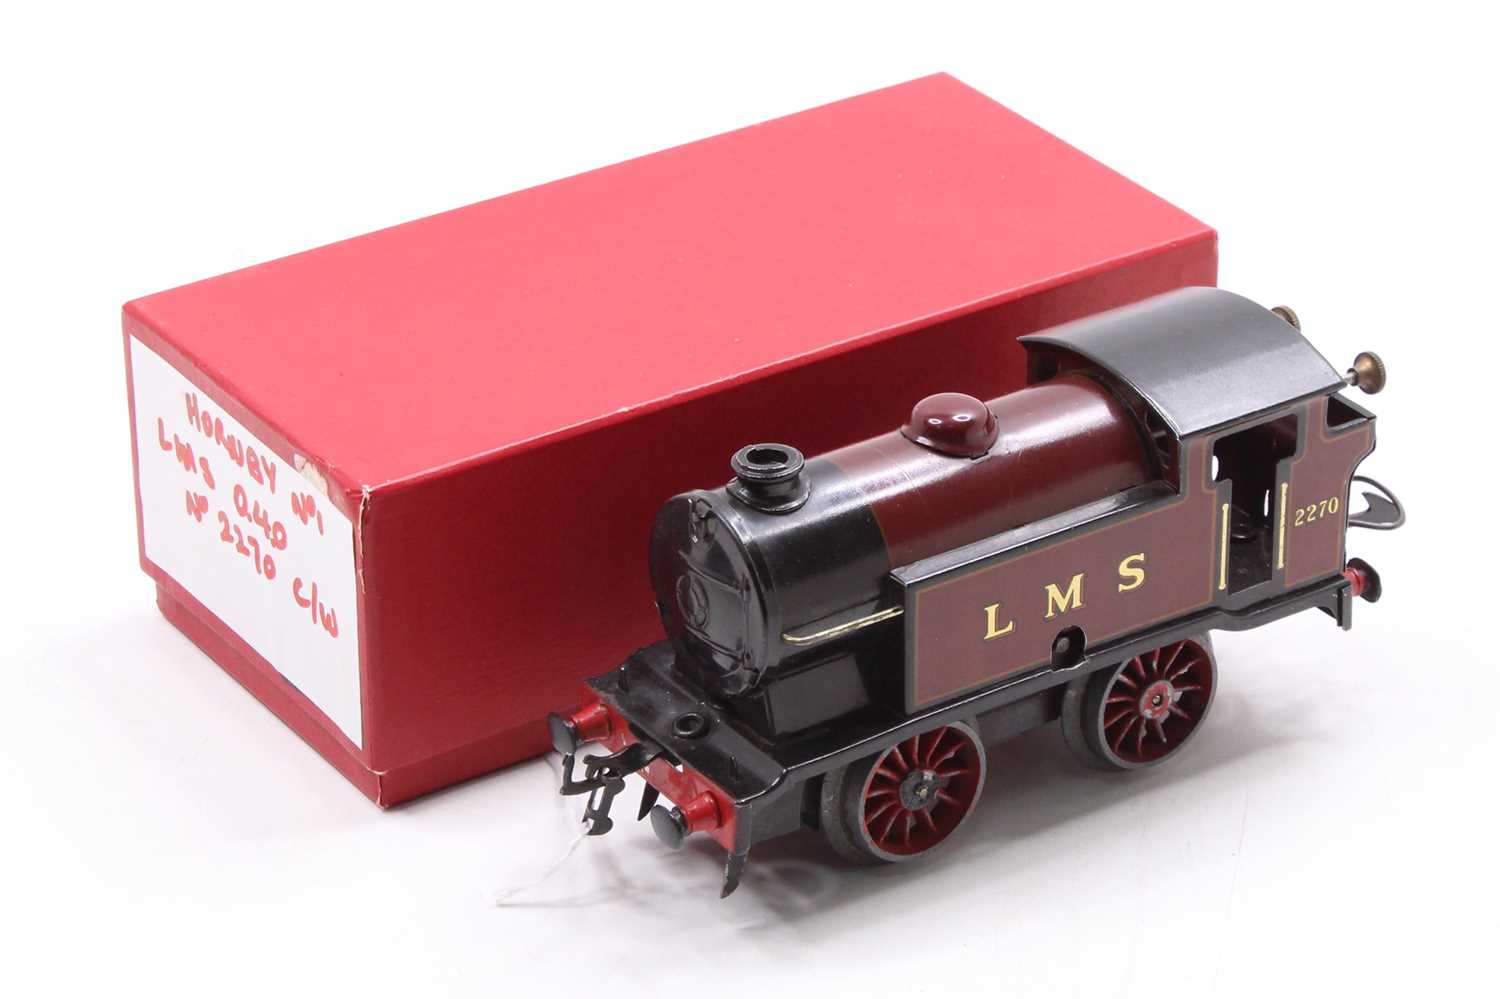 1932-6 Hornby M3 tank tin-printed loco 0-4-0 LMS 2270 red no cylinders, 12 spoke wheels, no coupling